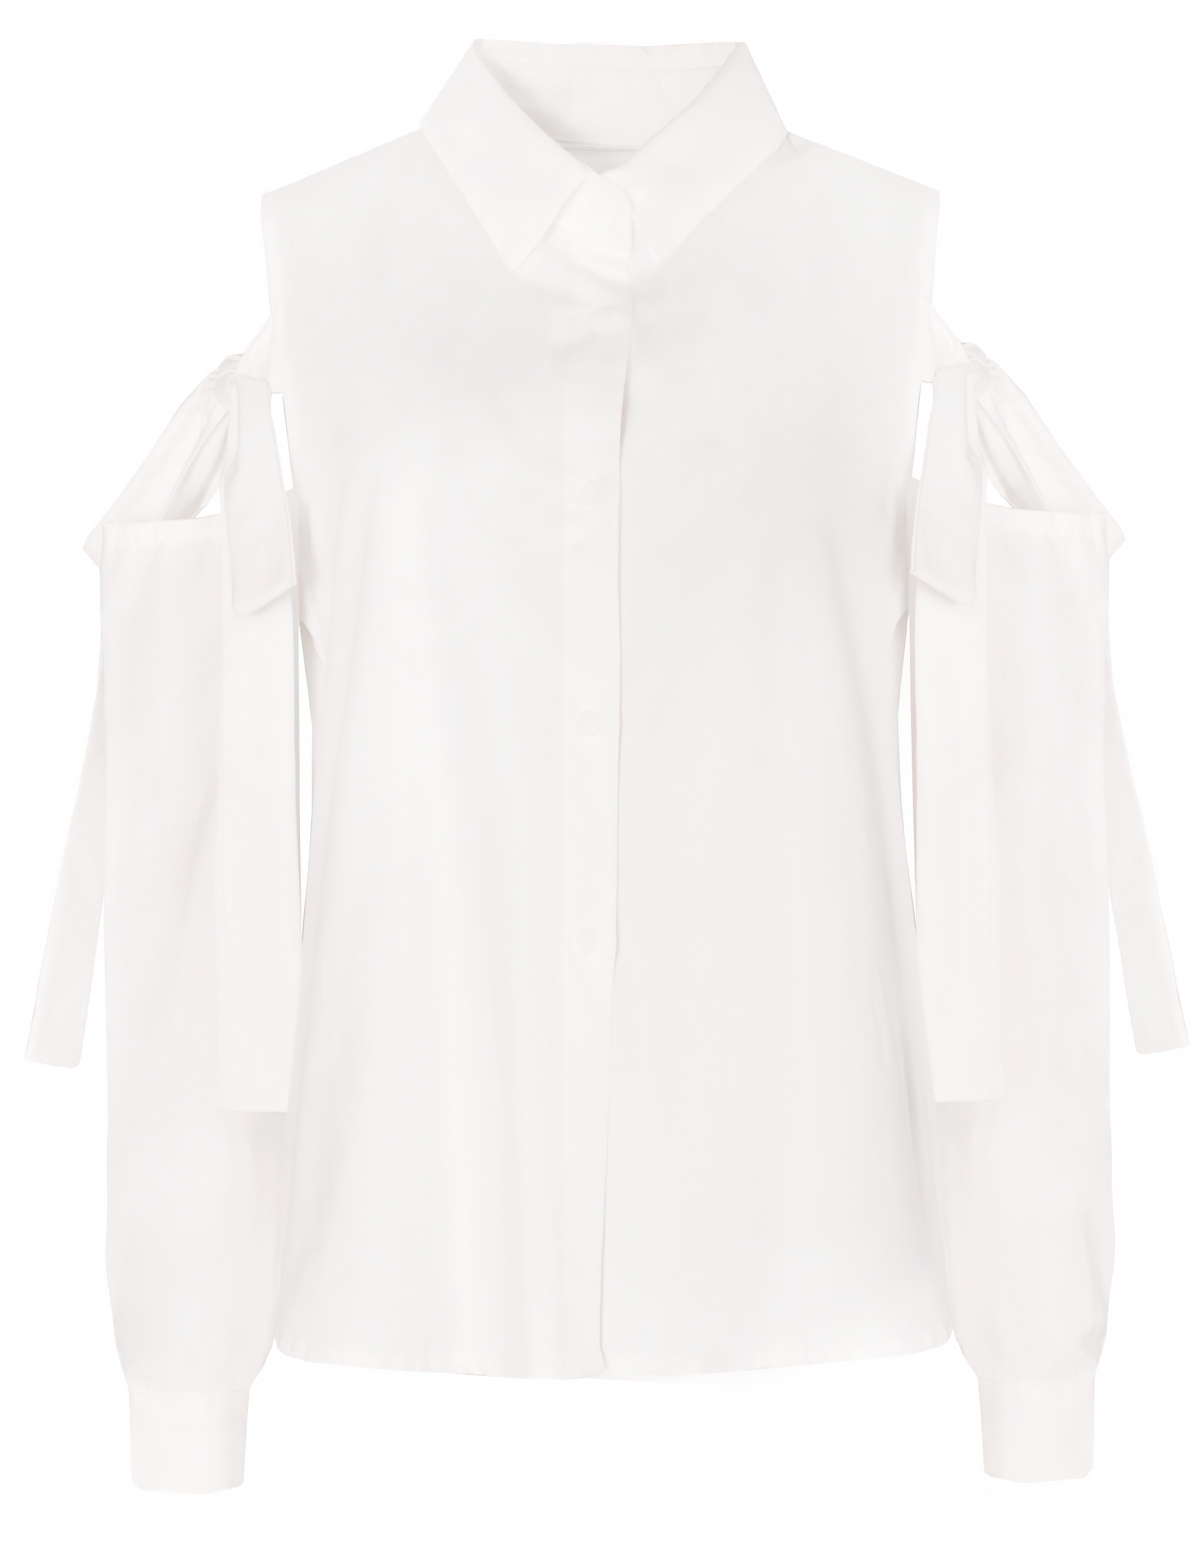 bow-tie-cold-shoulder-white-shirt-8051